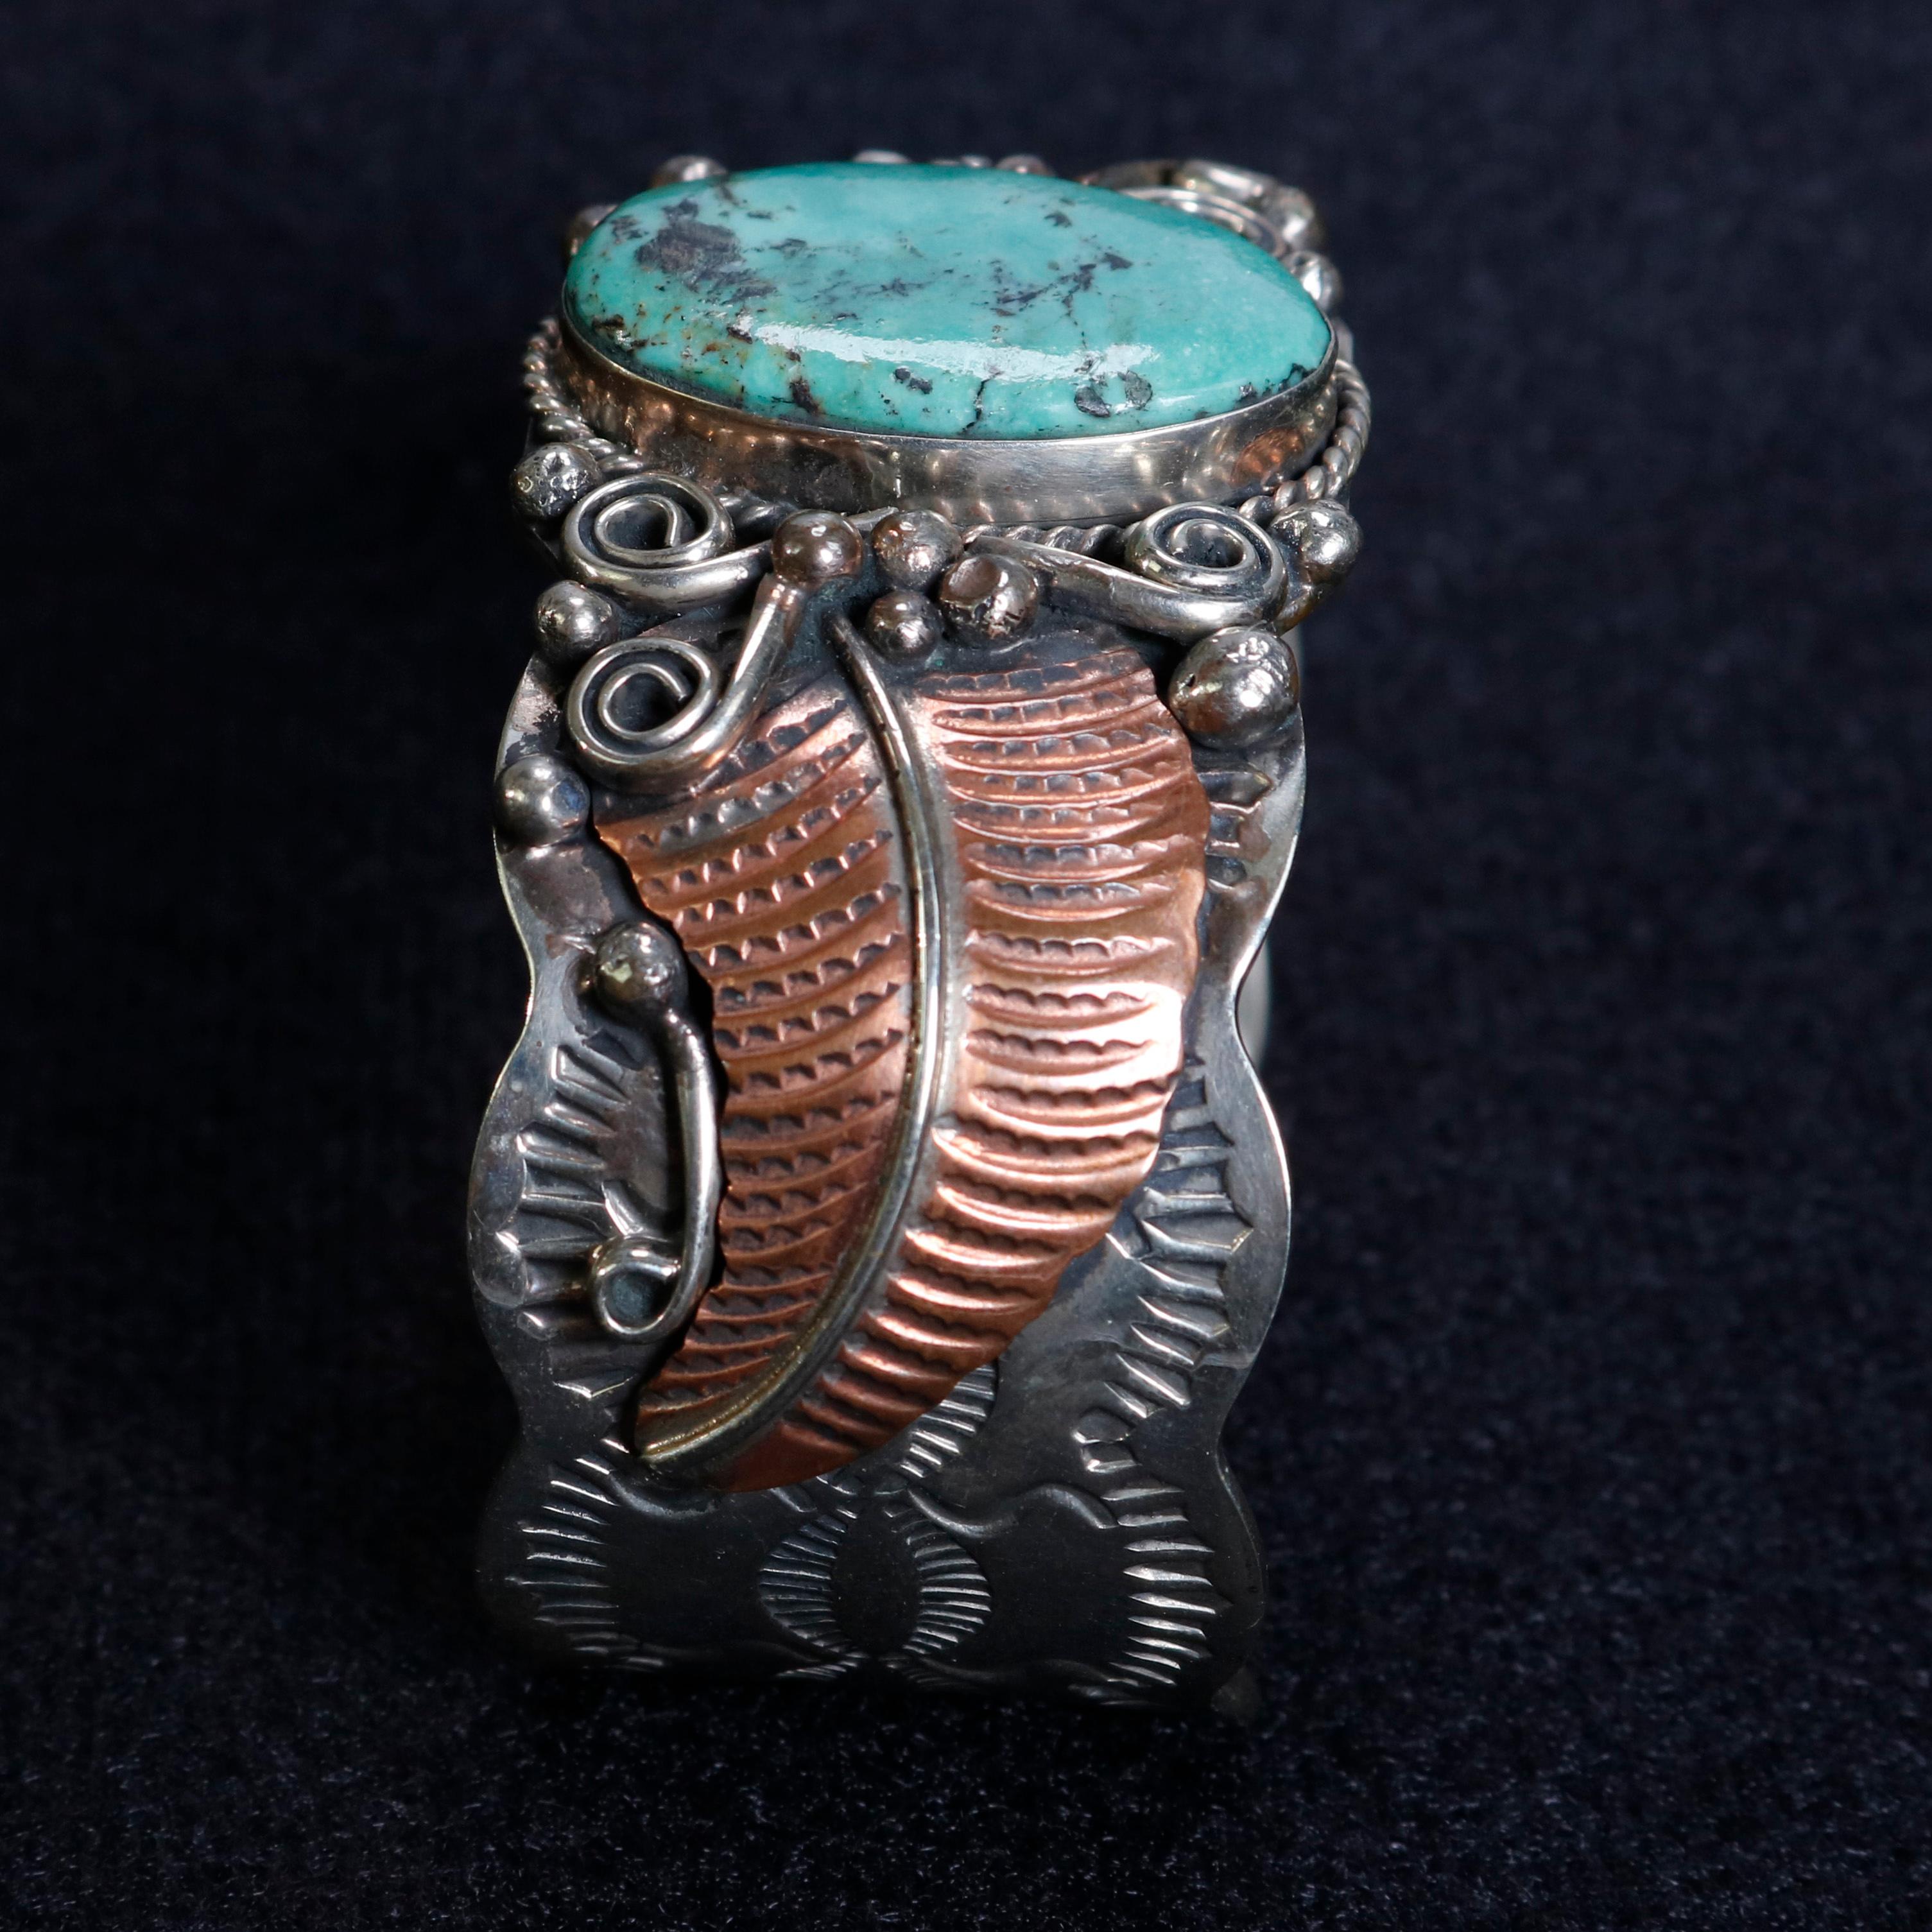 A vintage native American Navajo Indian handcrafted cuff bracelet by Albert Cleveland offers shaped sterling silver band having central turquoise seated in beveled setting and flanked by copper leaves and scroll decoration, maker mark as